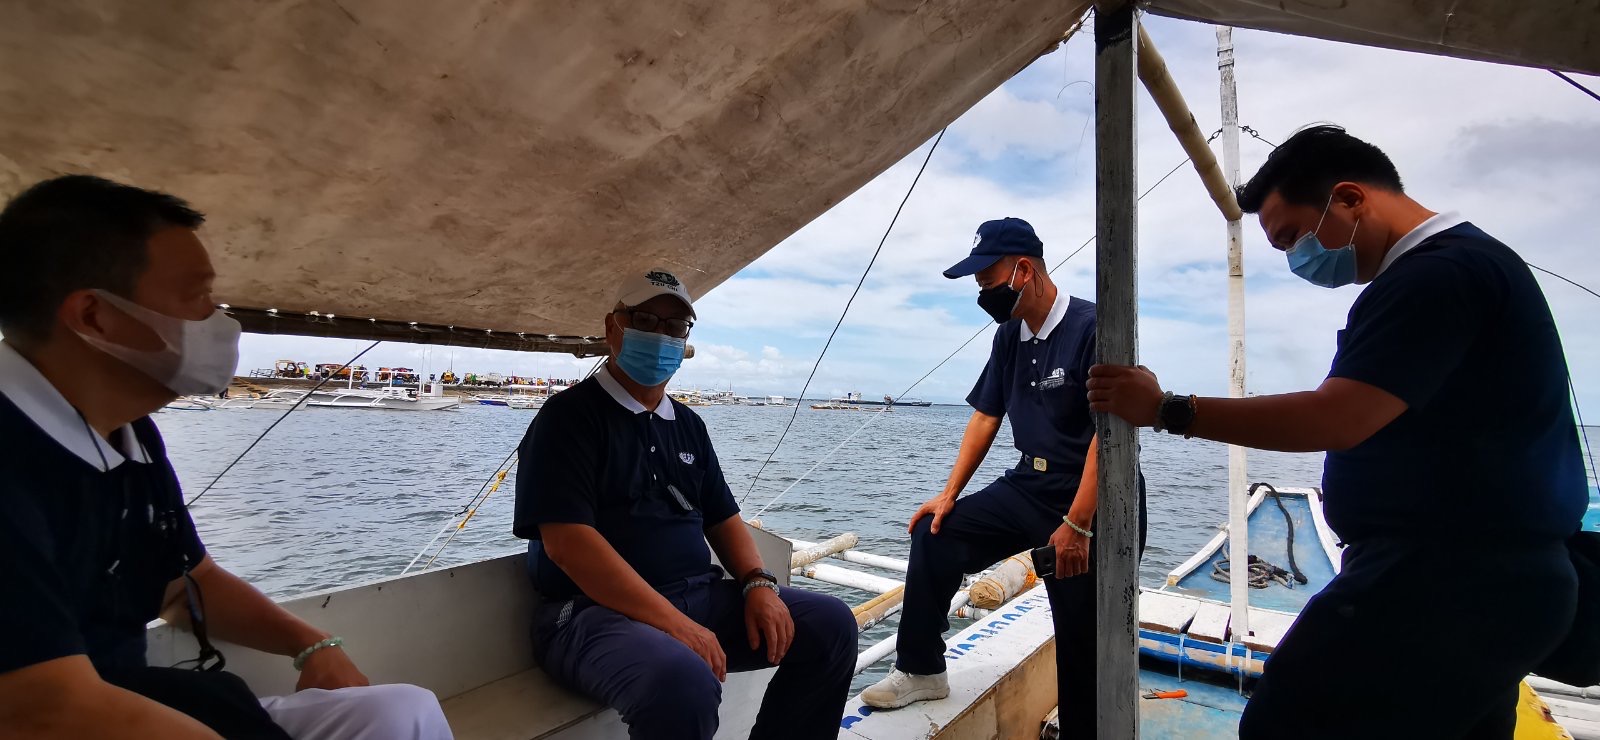 Tzu Chi volunteers take a light seacraft to visit other areas in Bohol badly affected by Typhoon Odette. 【Photo by Johnny Kwok】